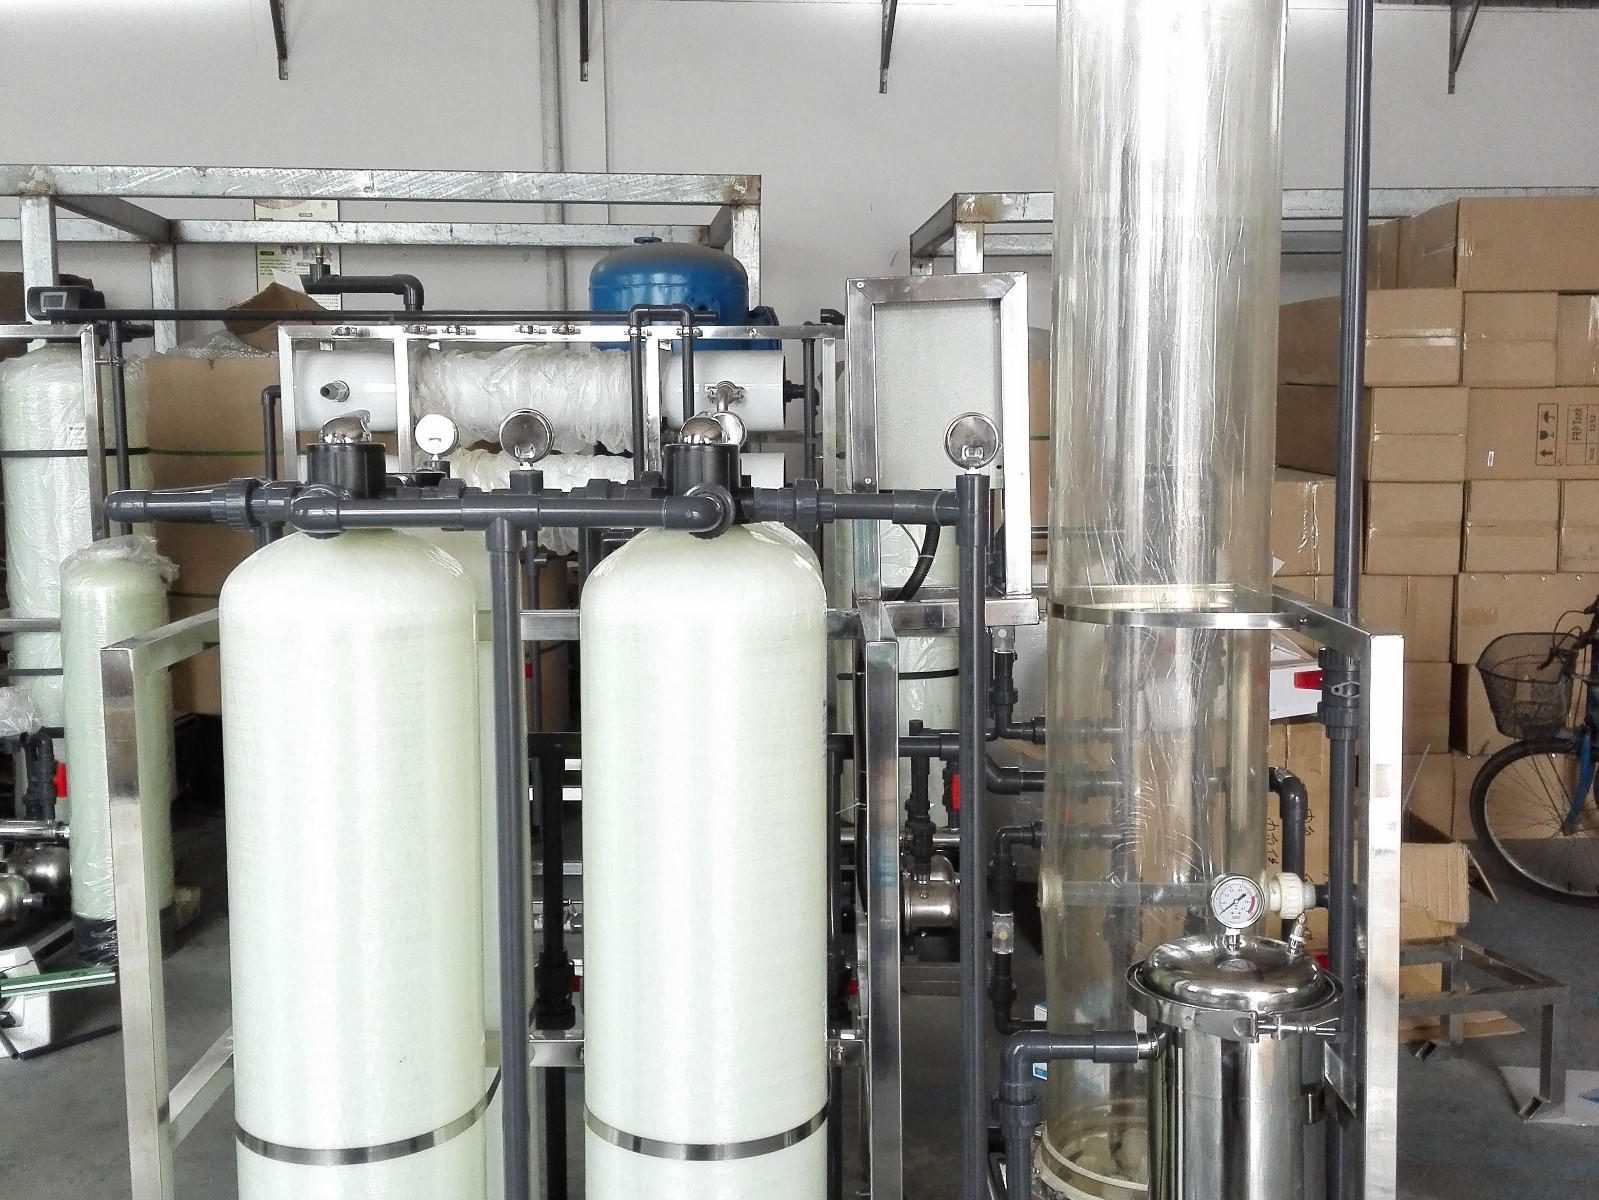 Ocpuritech resins deionized water system factory for business